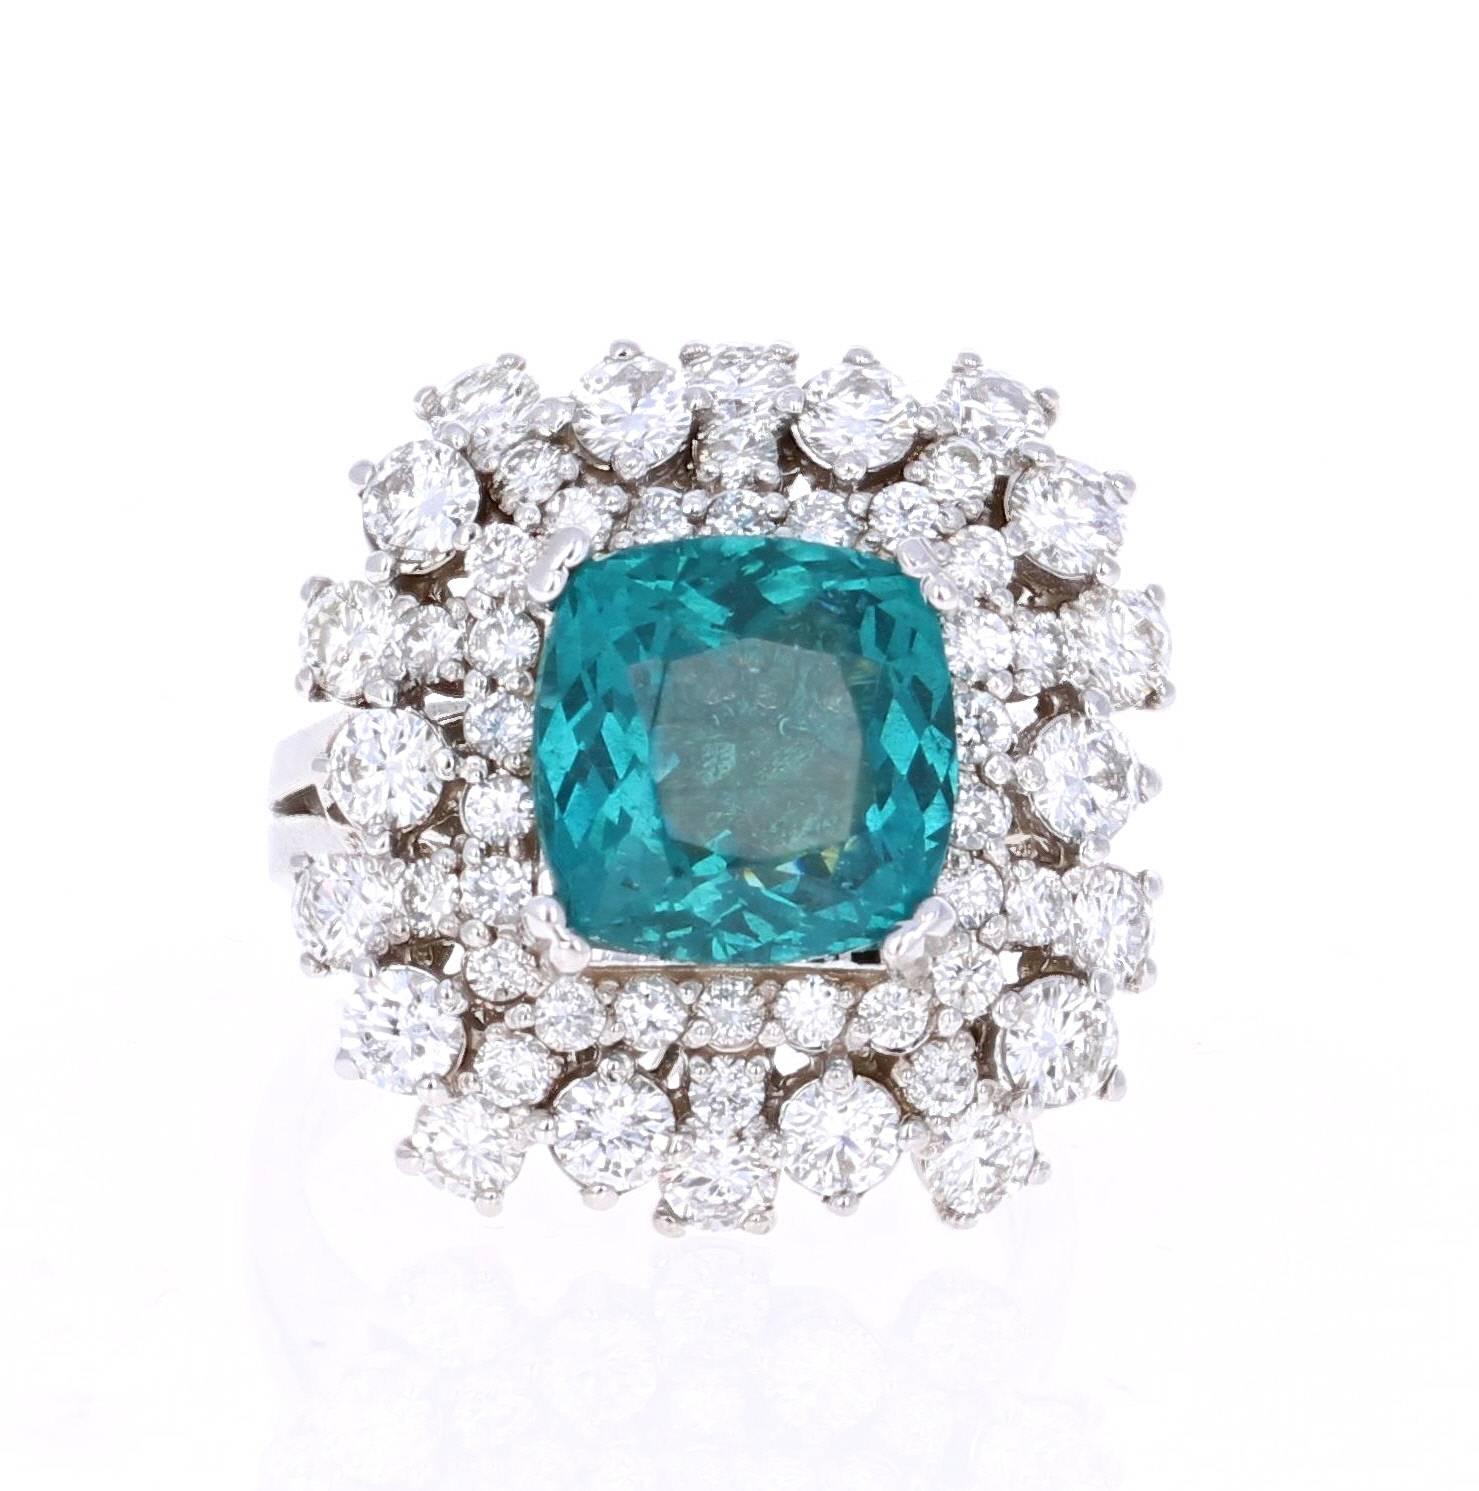 Stunning 7.02 Carat Apatite Diamond White Gold Cocktail Ring that is sure to elevate your accessory collection!

The ring has a 4.68 Carat Apatite set in the center of the ring surrounded by 52 Round Cut Diamonds that weigh 2.34 carats.  The total